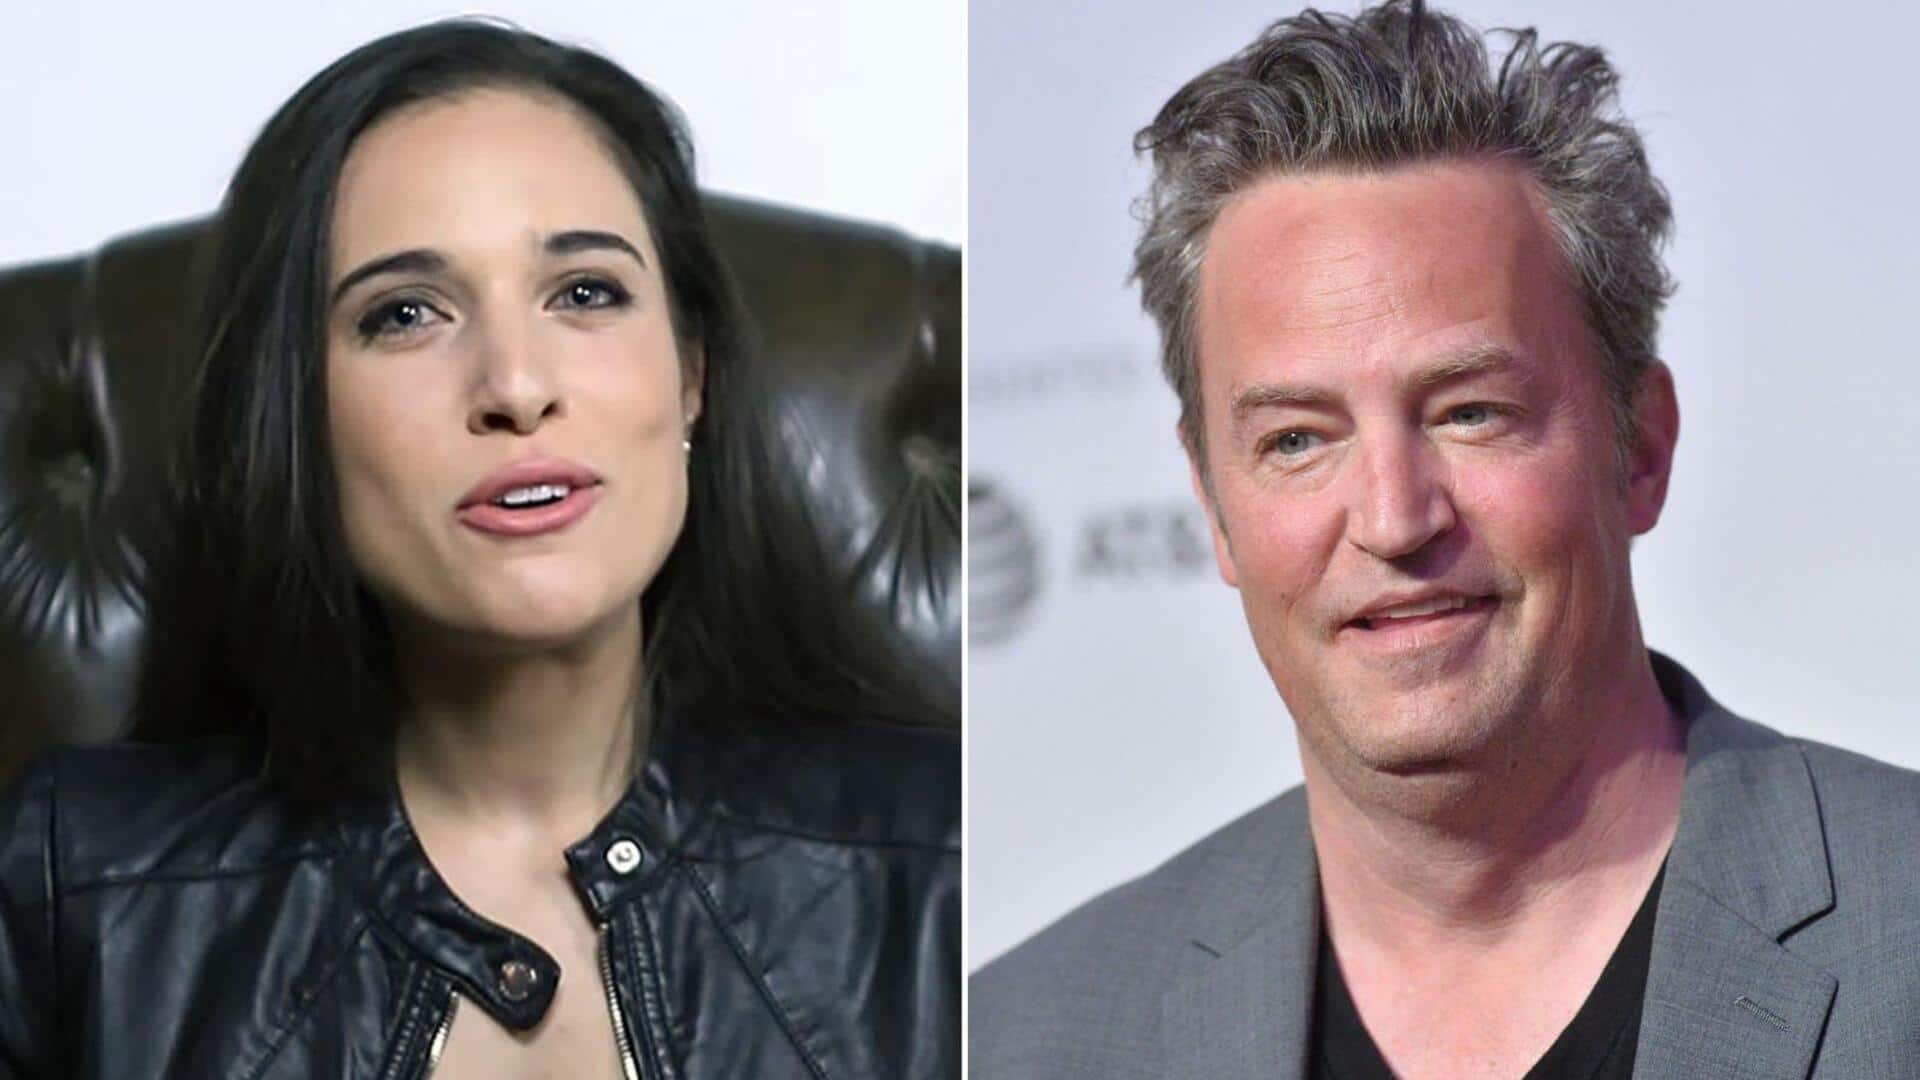 Matthew Perry had no memory of proposing to Molly Hurwitz